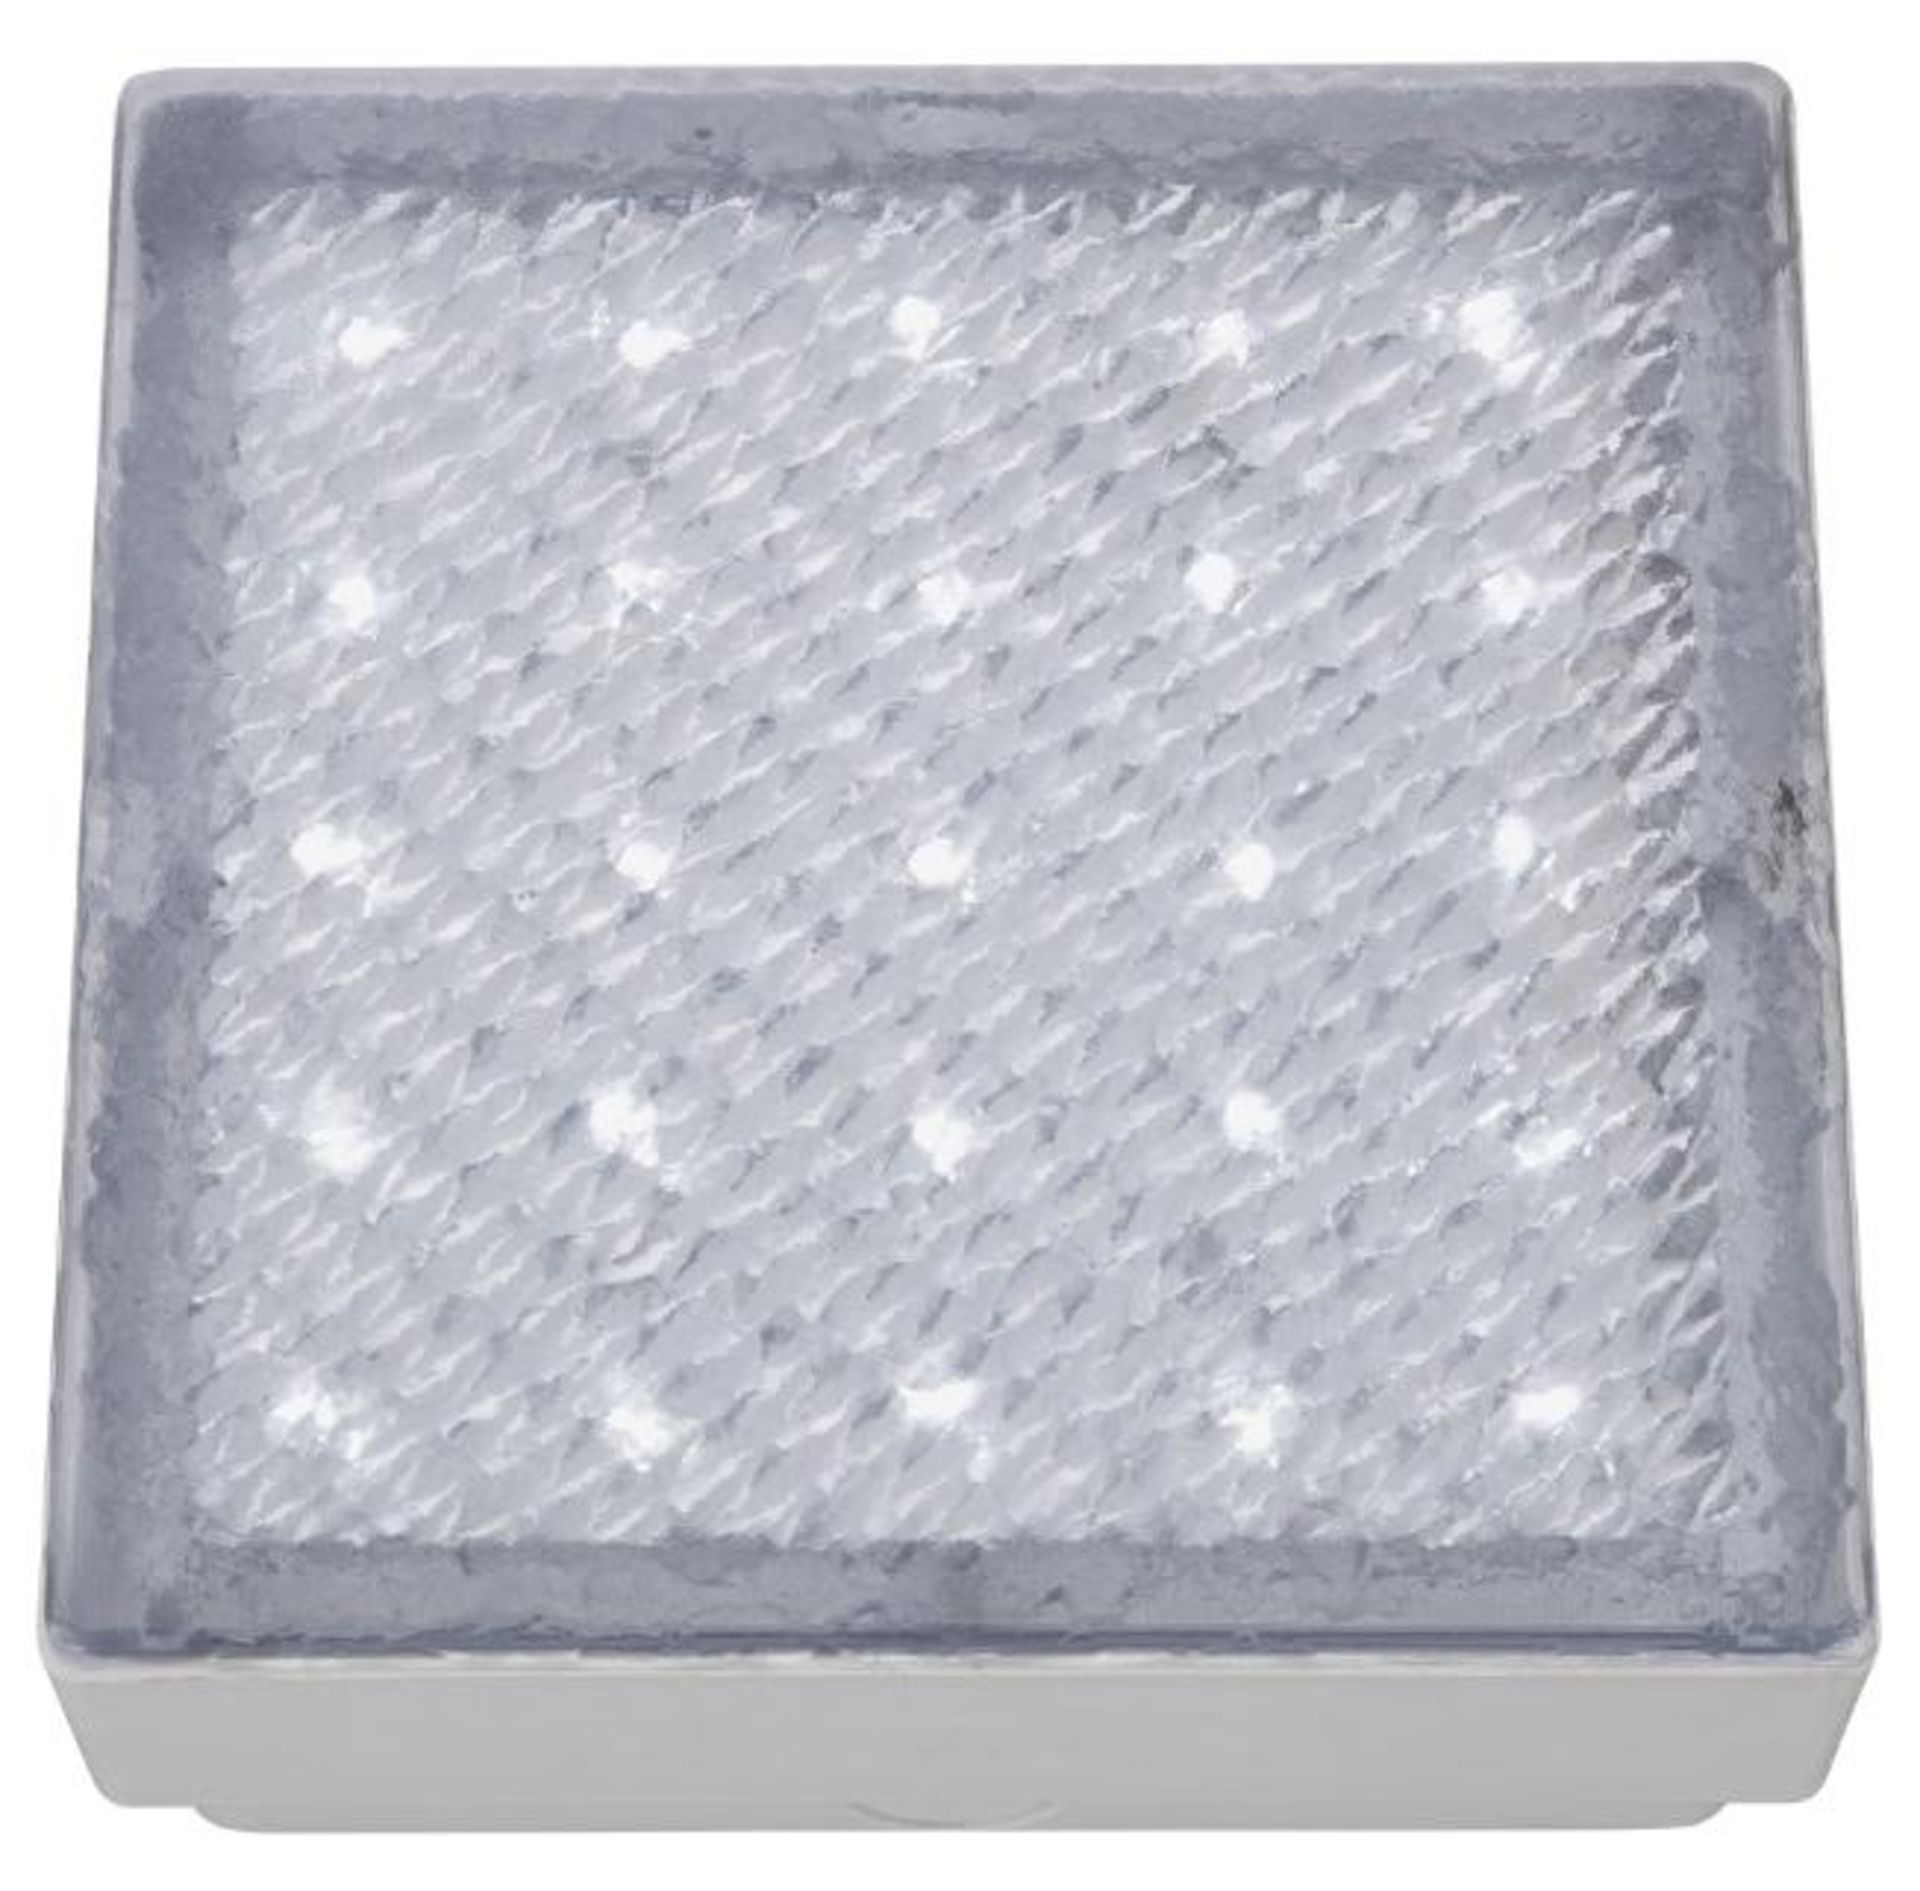 1 x Stainless Steel IP68 25-LED Recessed Square Walkover With White LED Light - New Boxed Stock - CL